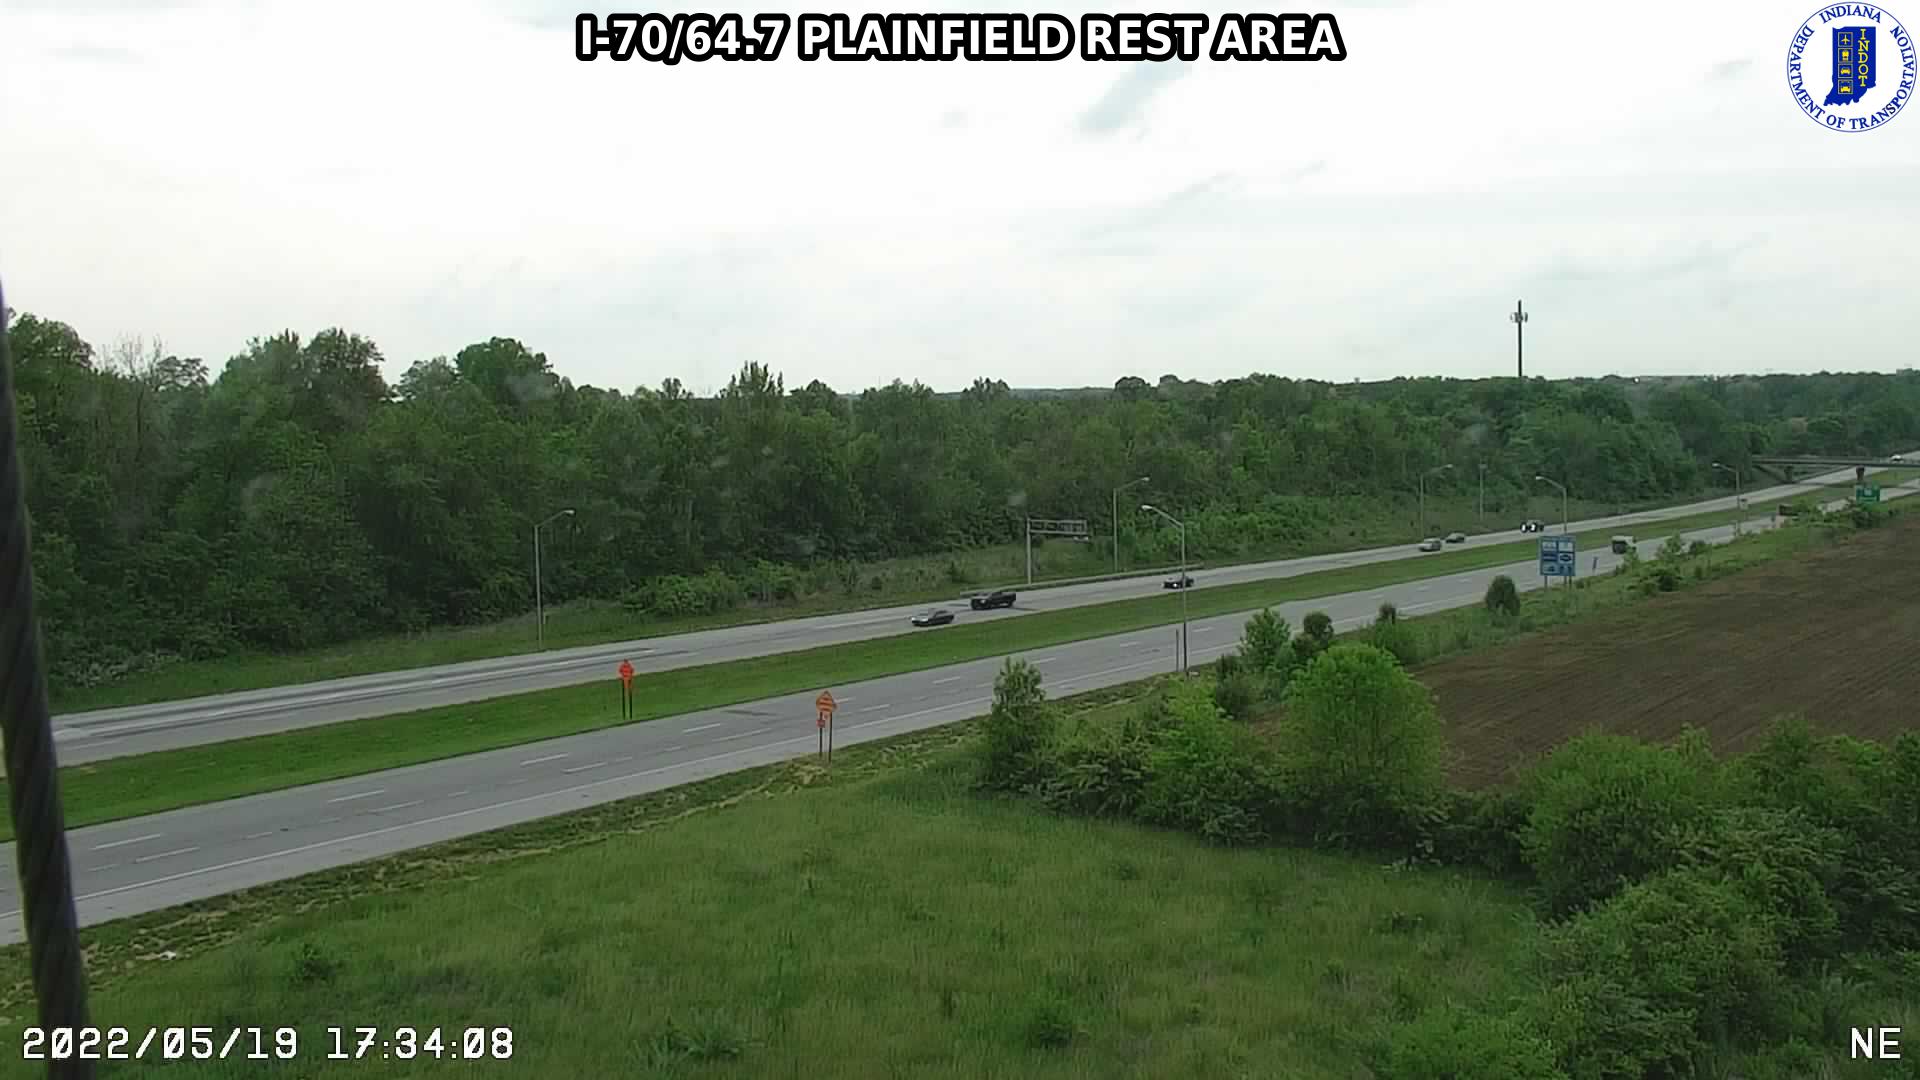 I-65/97.4 Worthsville Rd  (88) () - Indiana